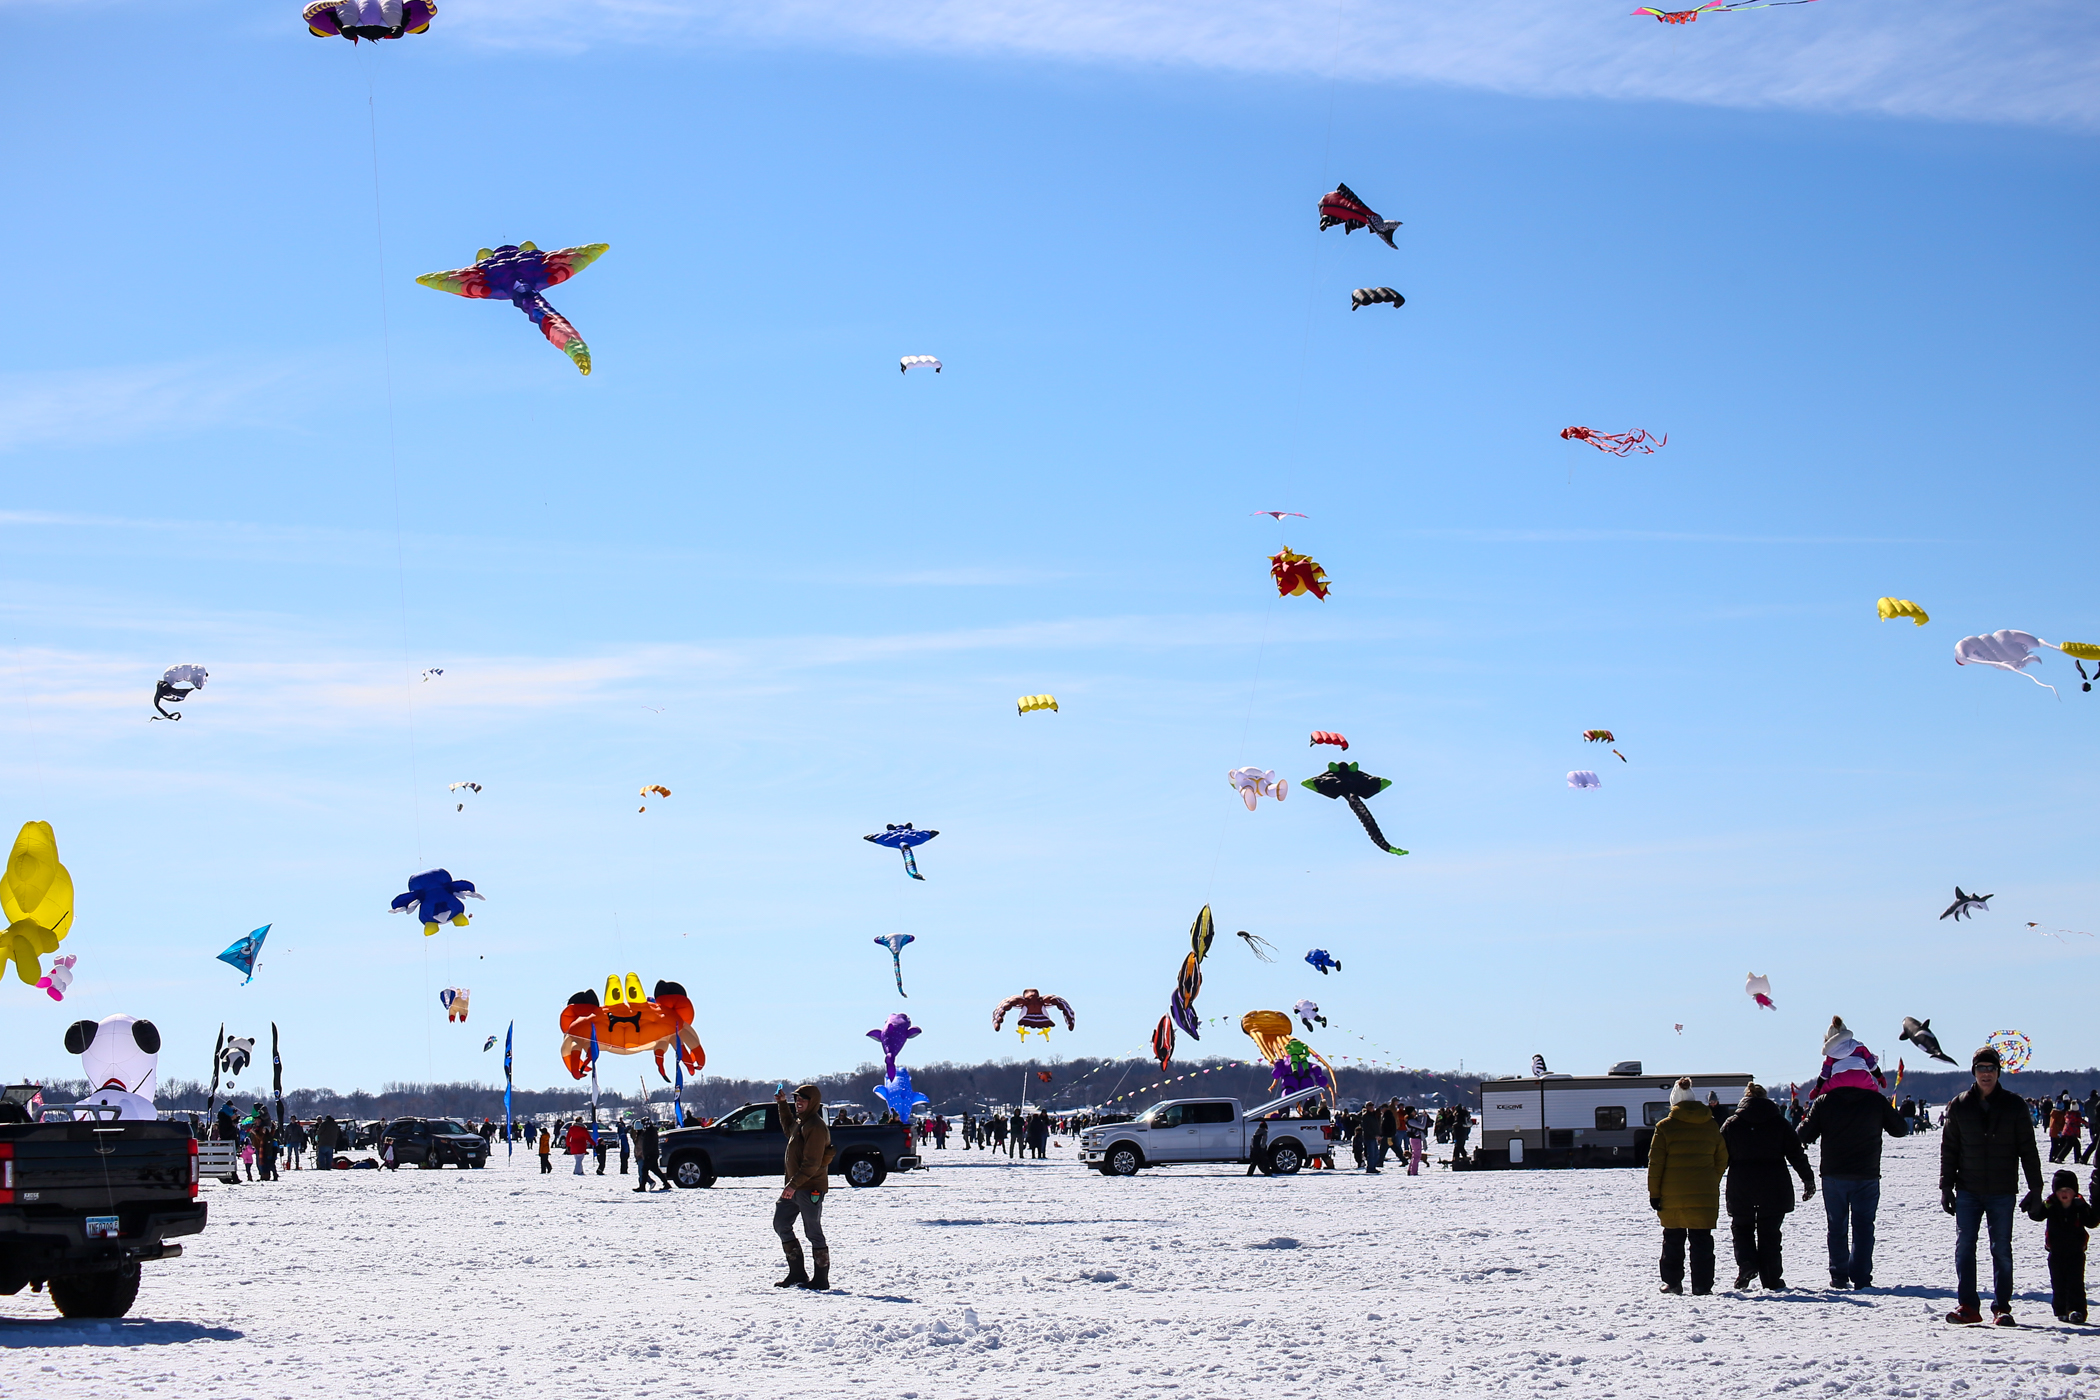 Flying high with Kites on Ice Maple Lake Messenger